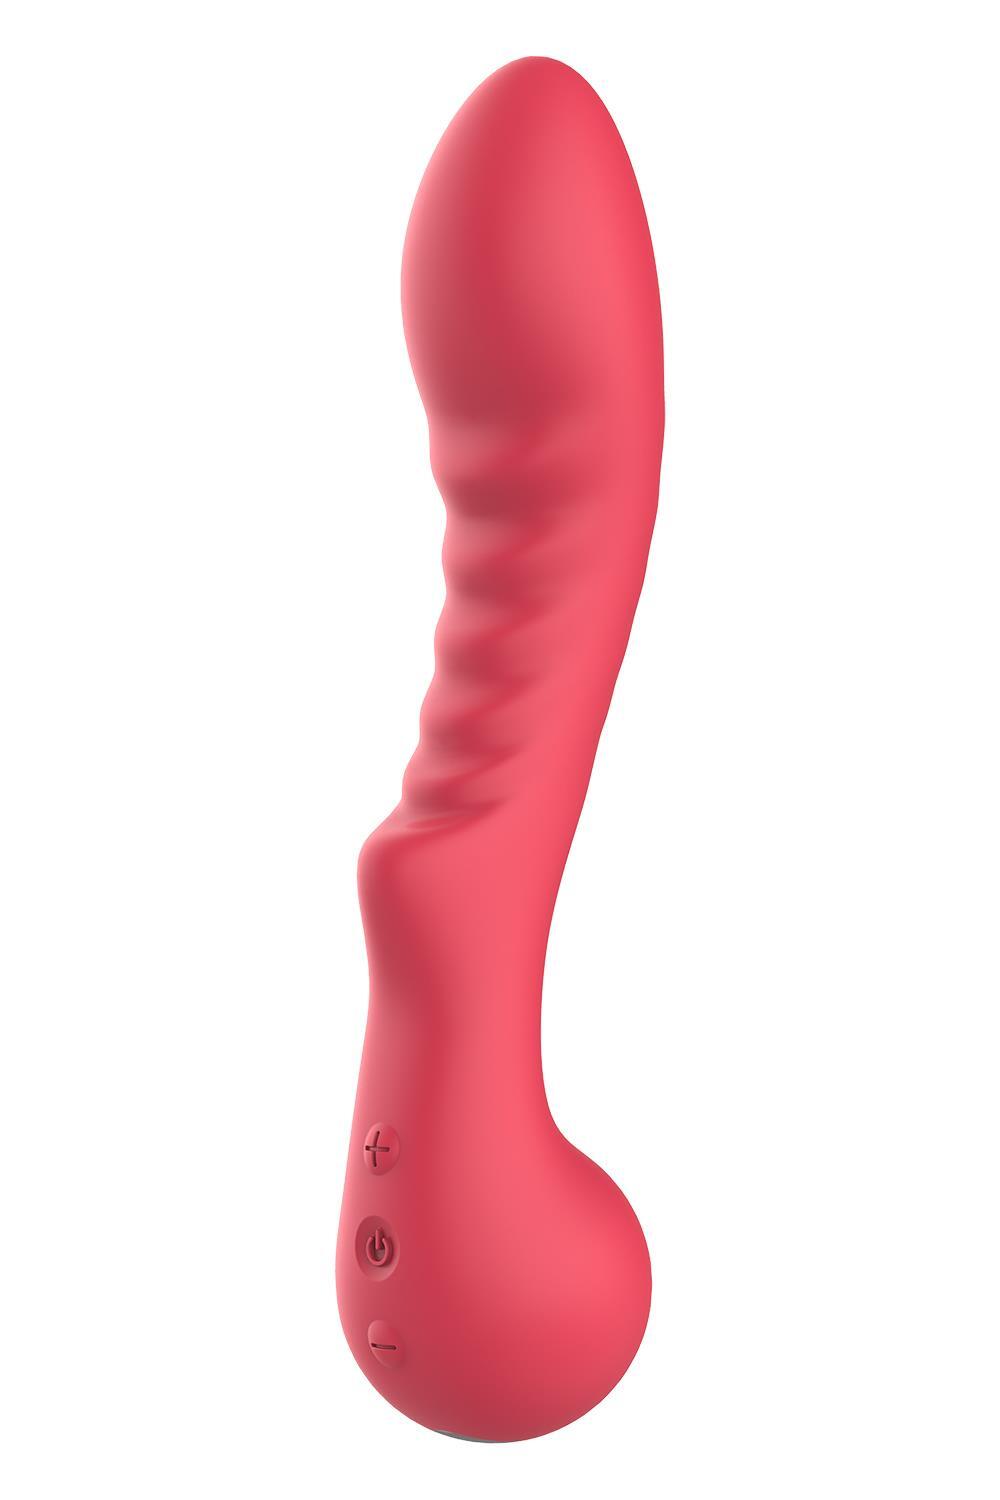 Dream Toys Amour Flexible G Spot Vibe Aimee Red